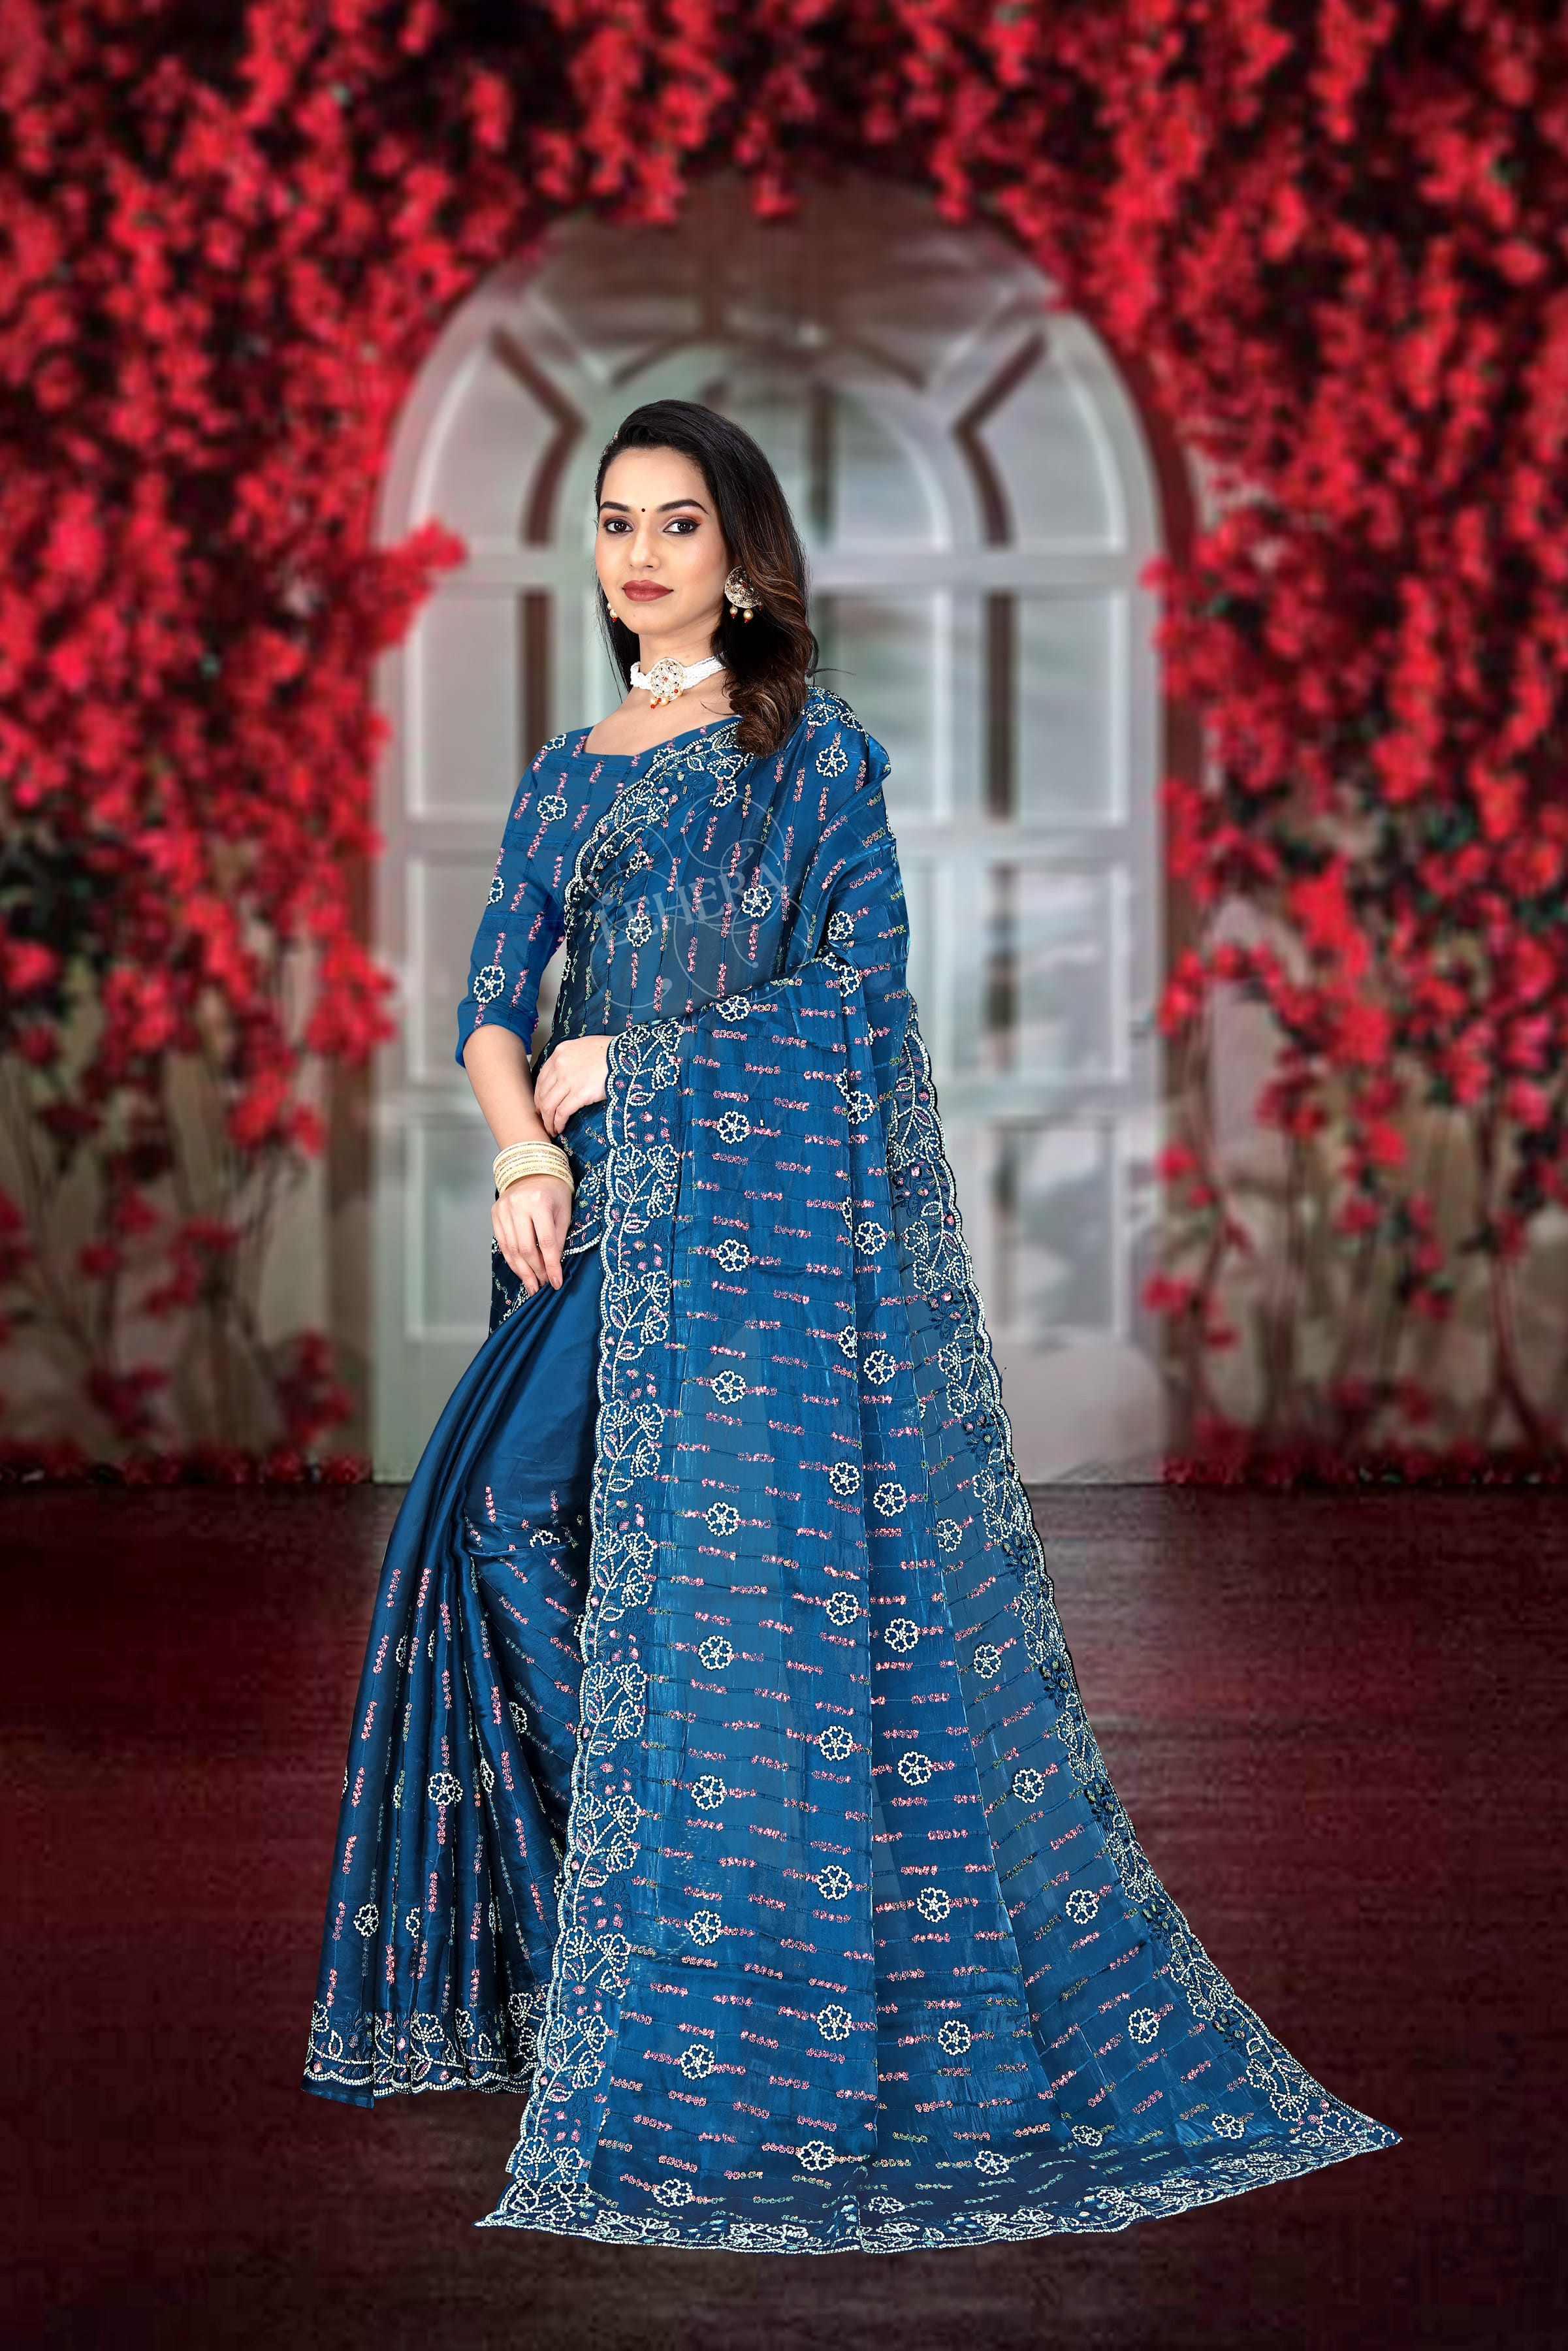  Exquisite blue Colour Jimmy Choo embroidery Saree designed to make you the epitome of elegance and style